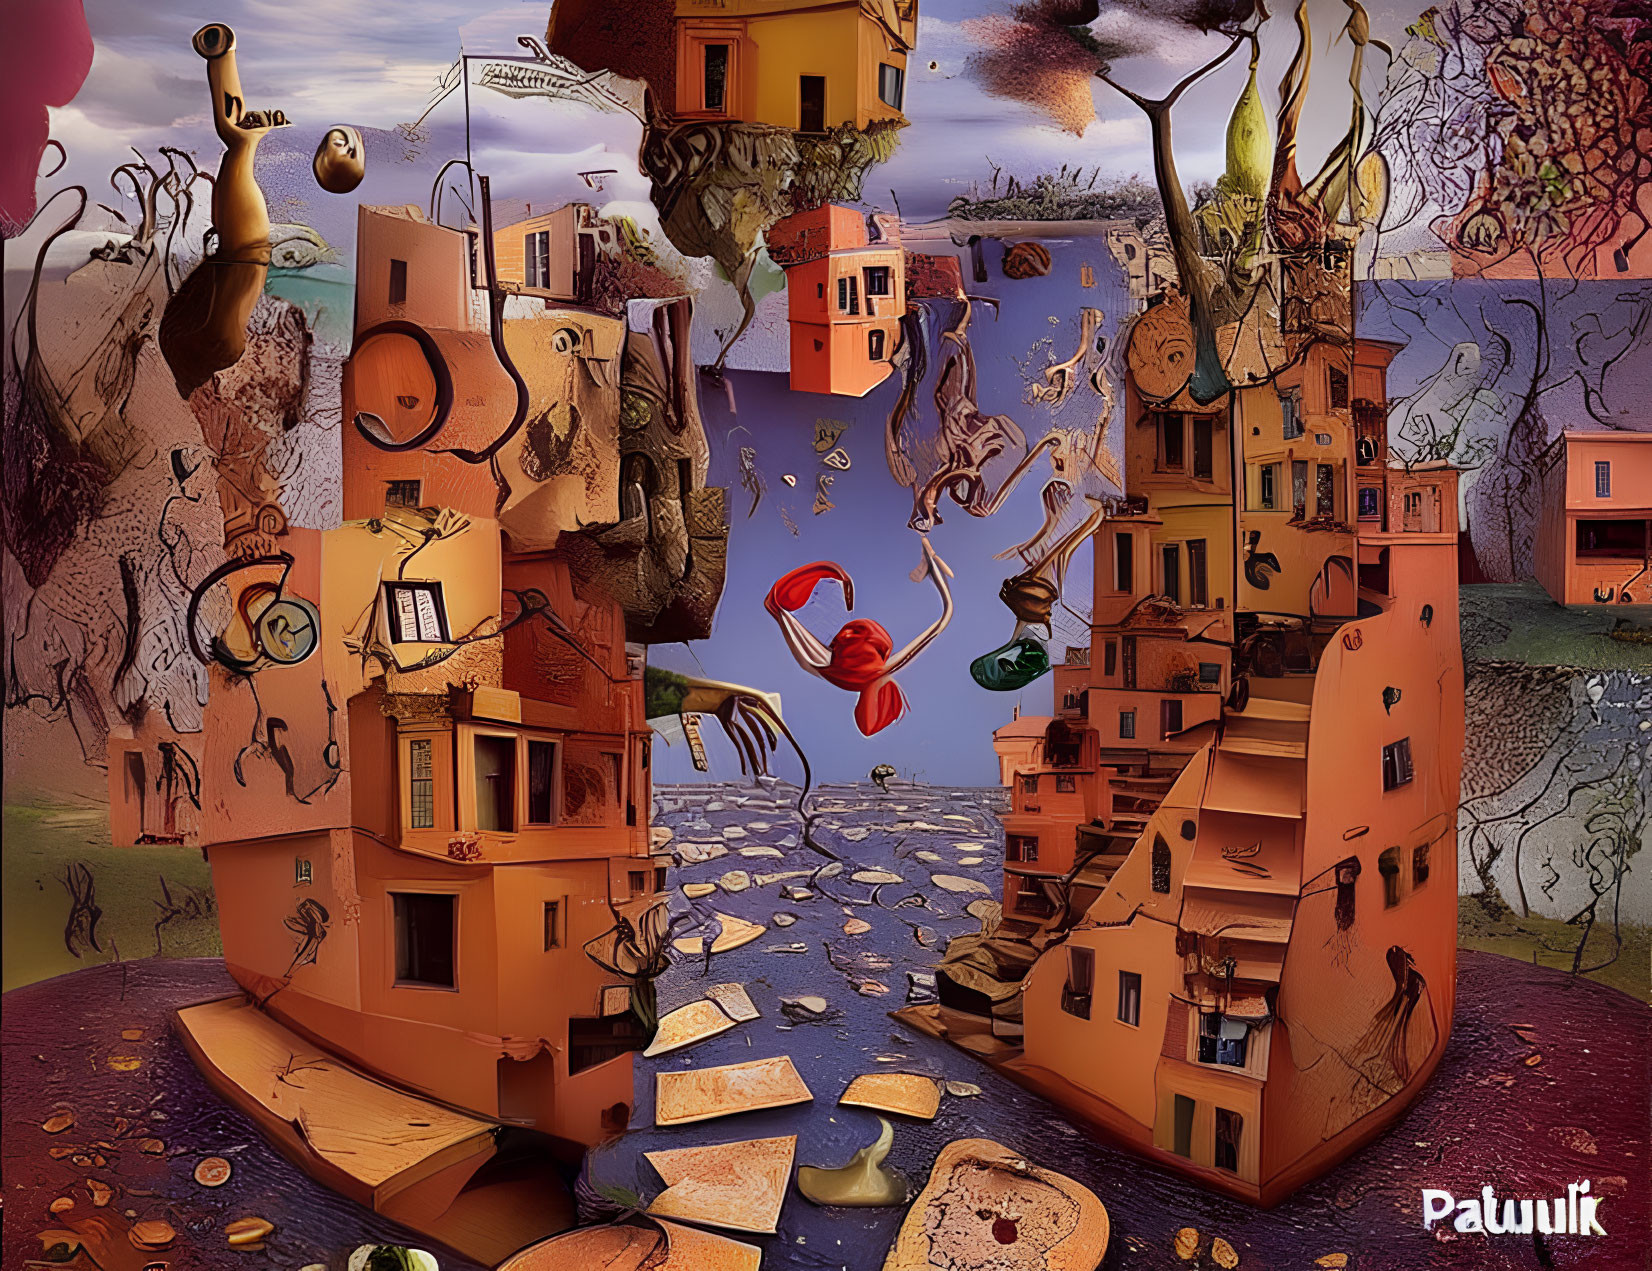 Whimsical surreal landscape with melting buildings and floating objects